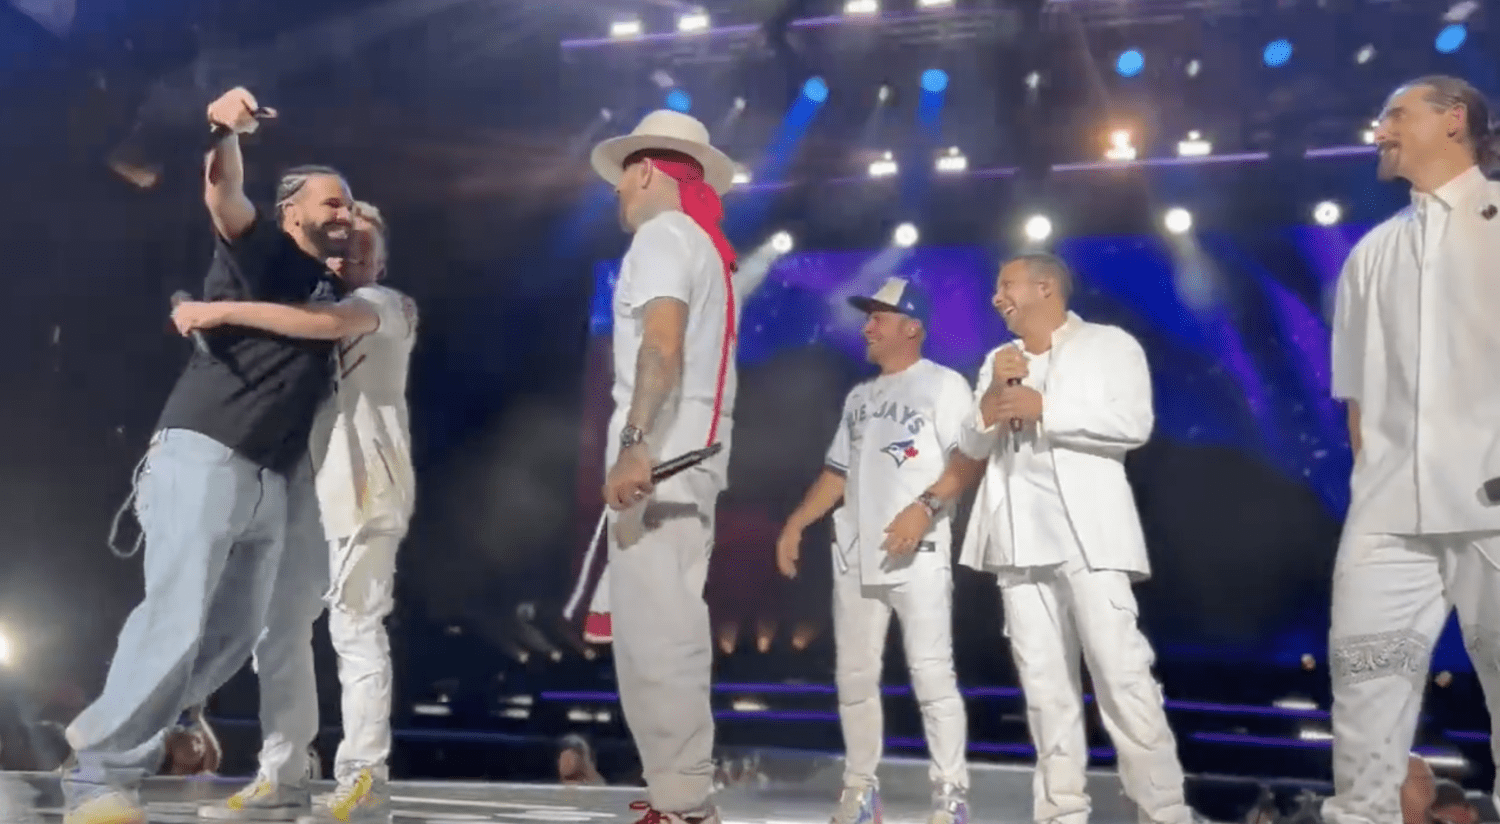 Drake Joins Backstreet Boys to Perform “I Want It That Way” in